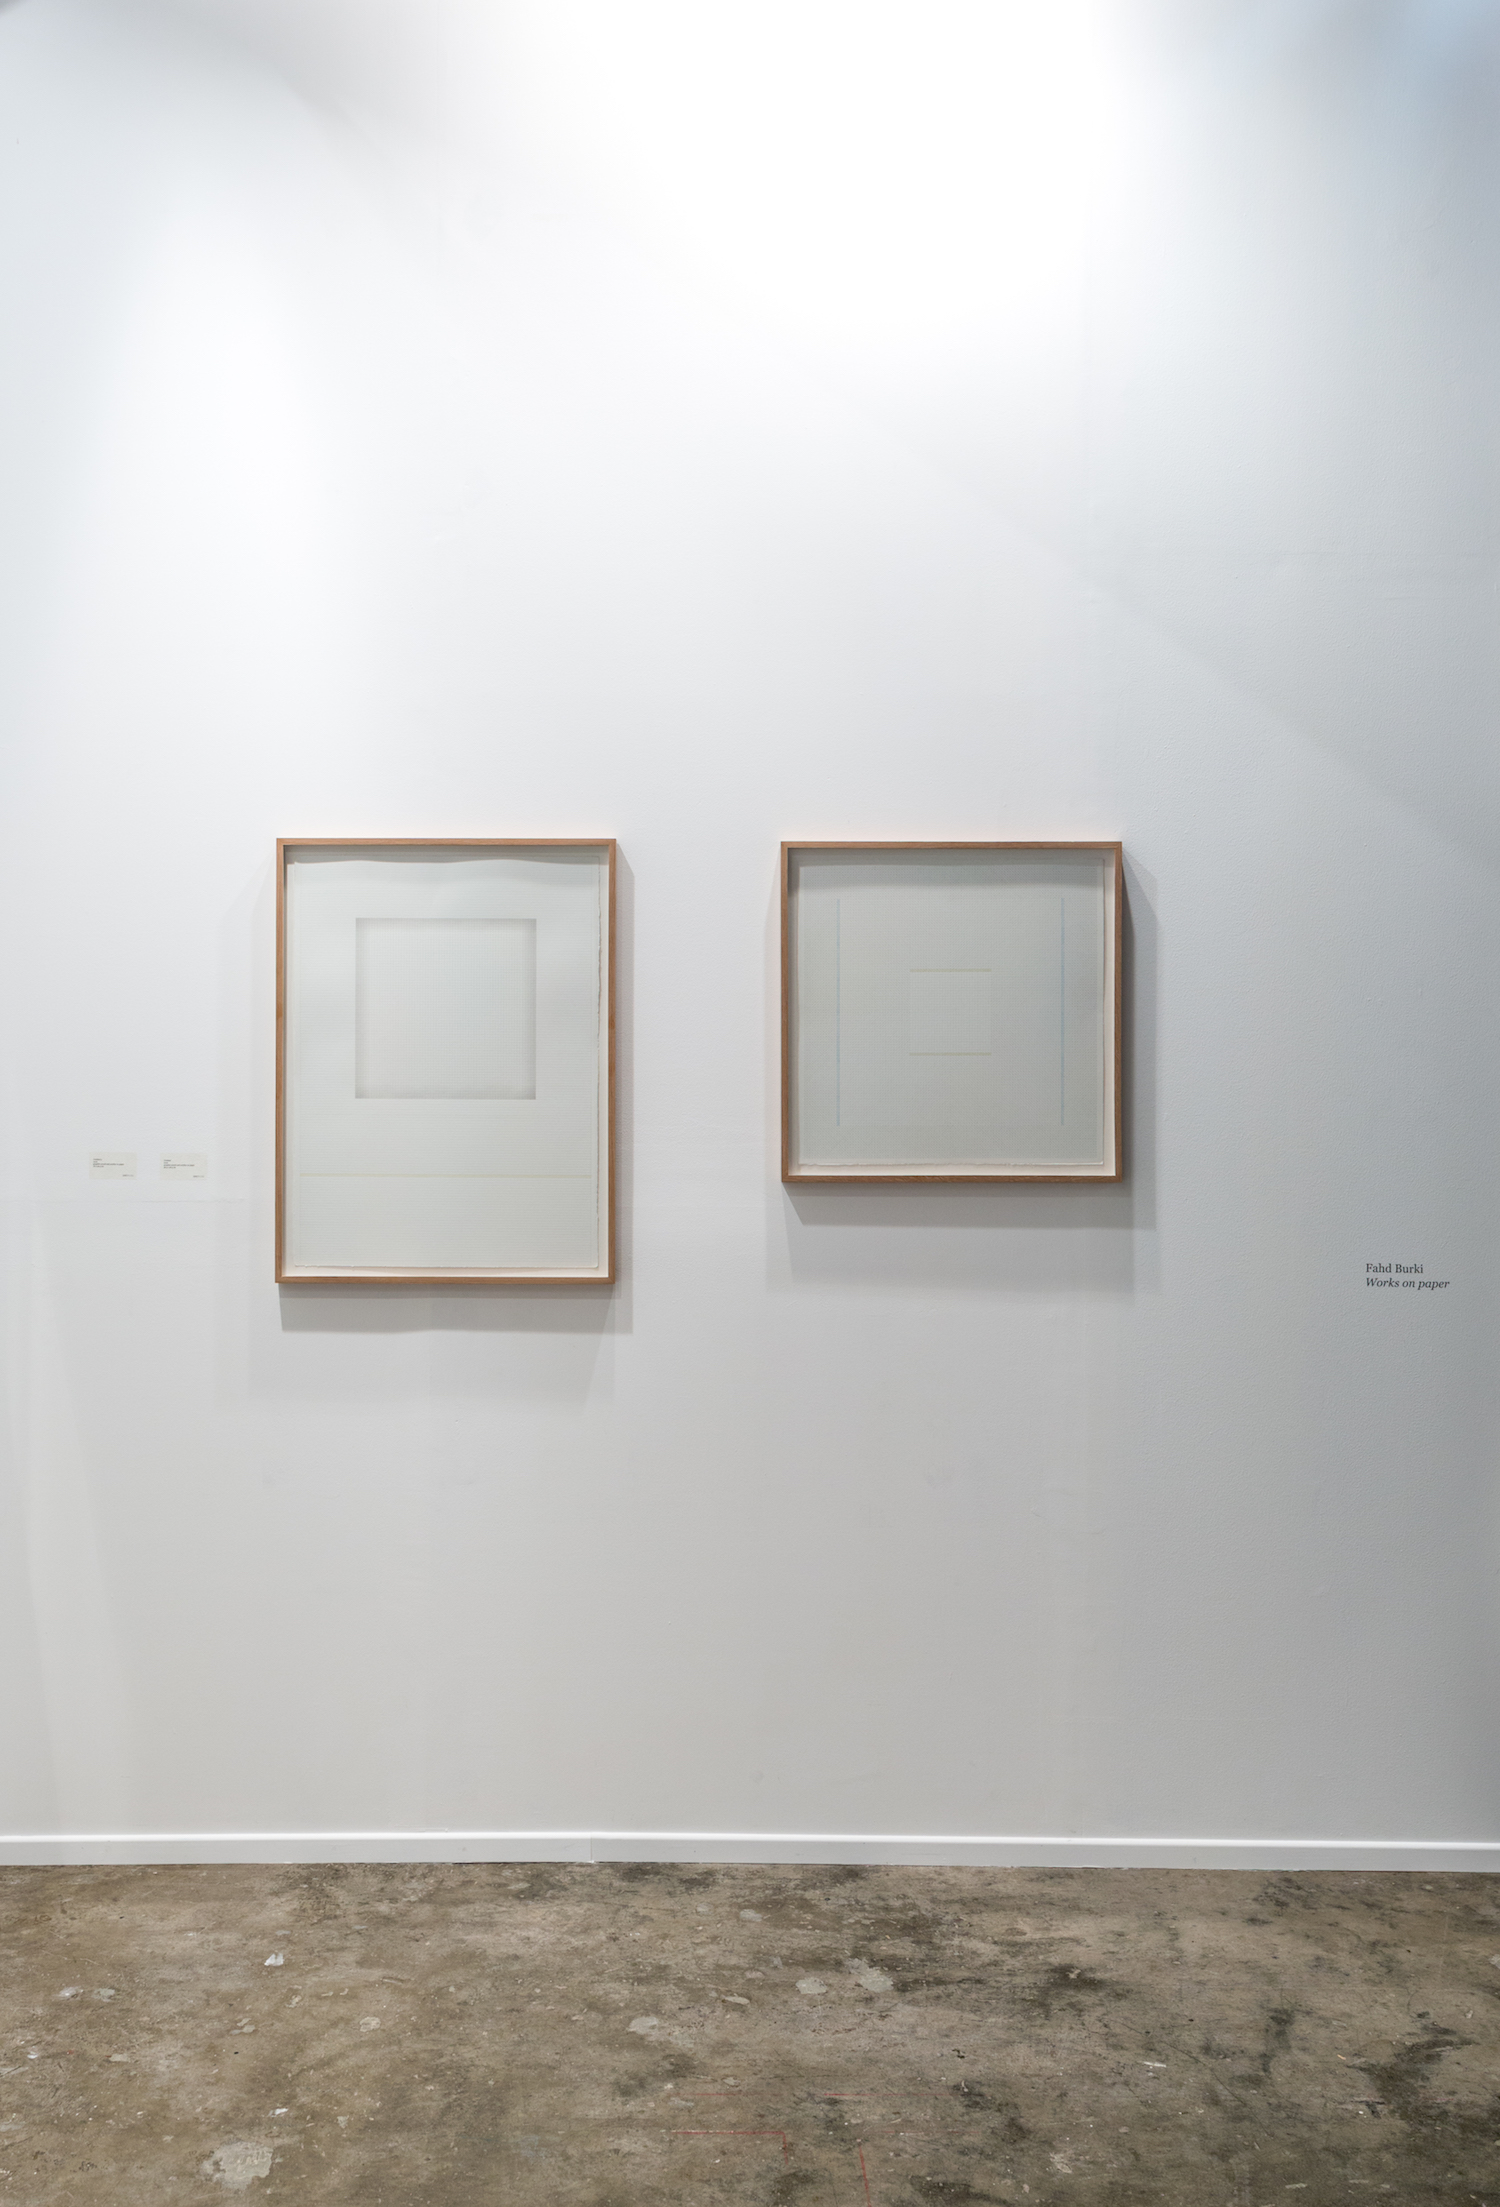  LEFT - RIGHT  LEFT: Untitled 3, 2016, graphite pencil and acrylics on paper, 76 x 56.5 cm  //  RIGHT: Untitled, 2016, graphite pencil and acrylics on paper, 56.5 x 56.5 cm 